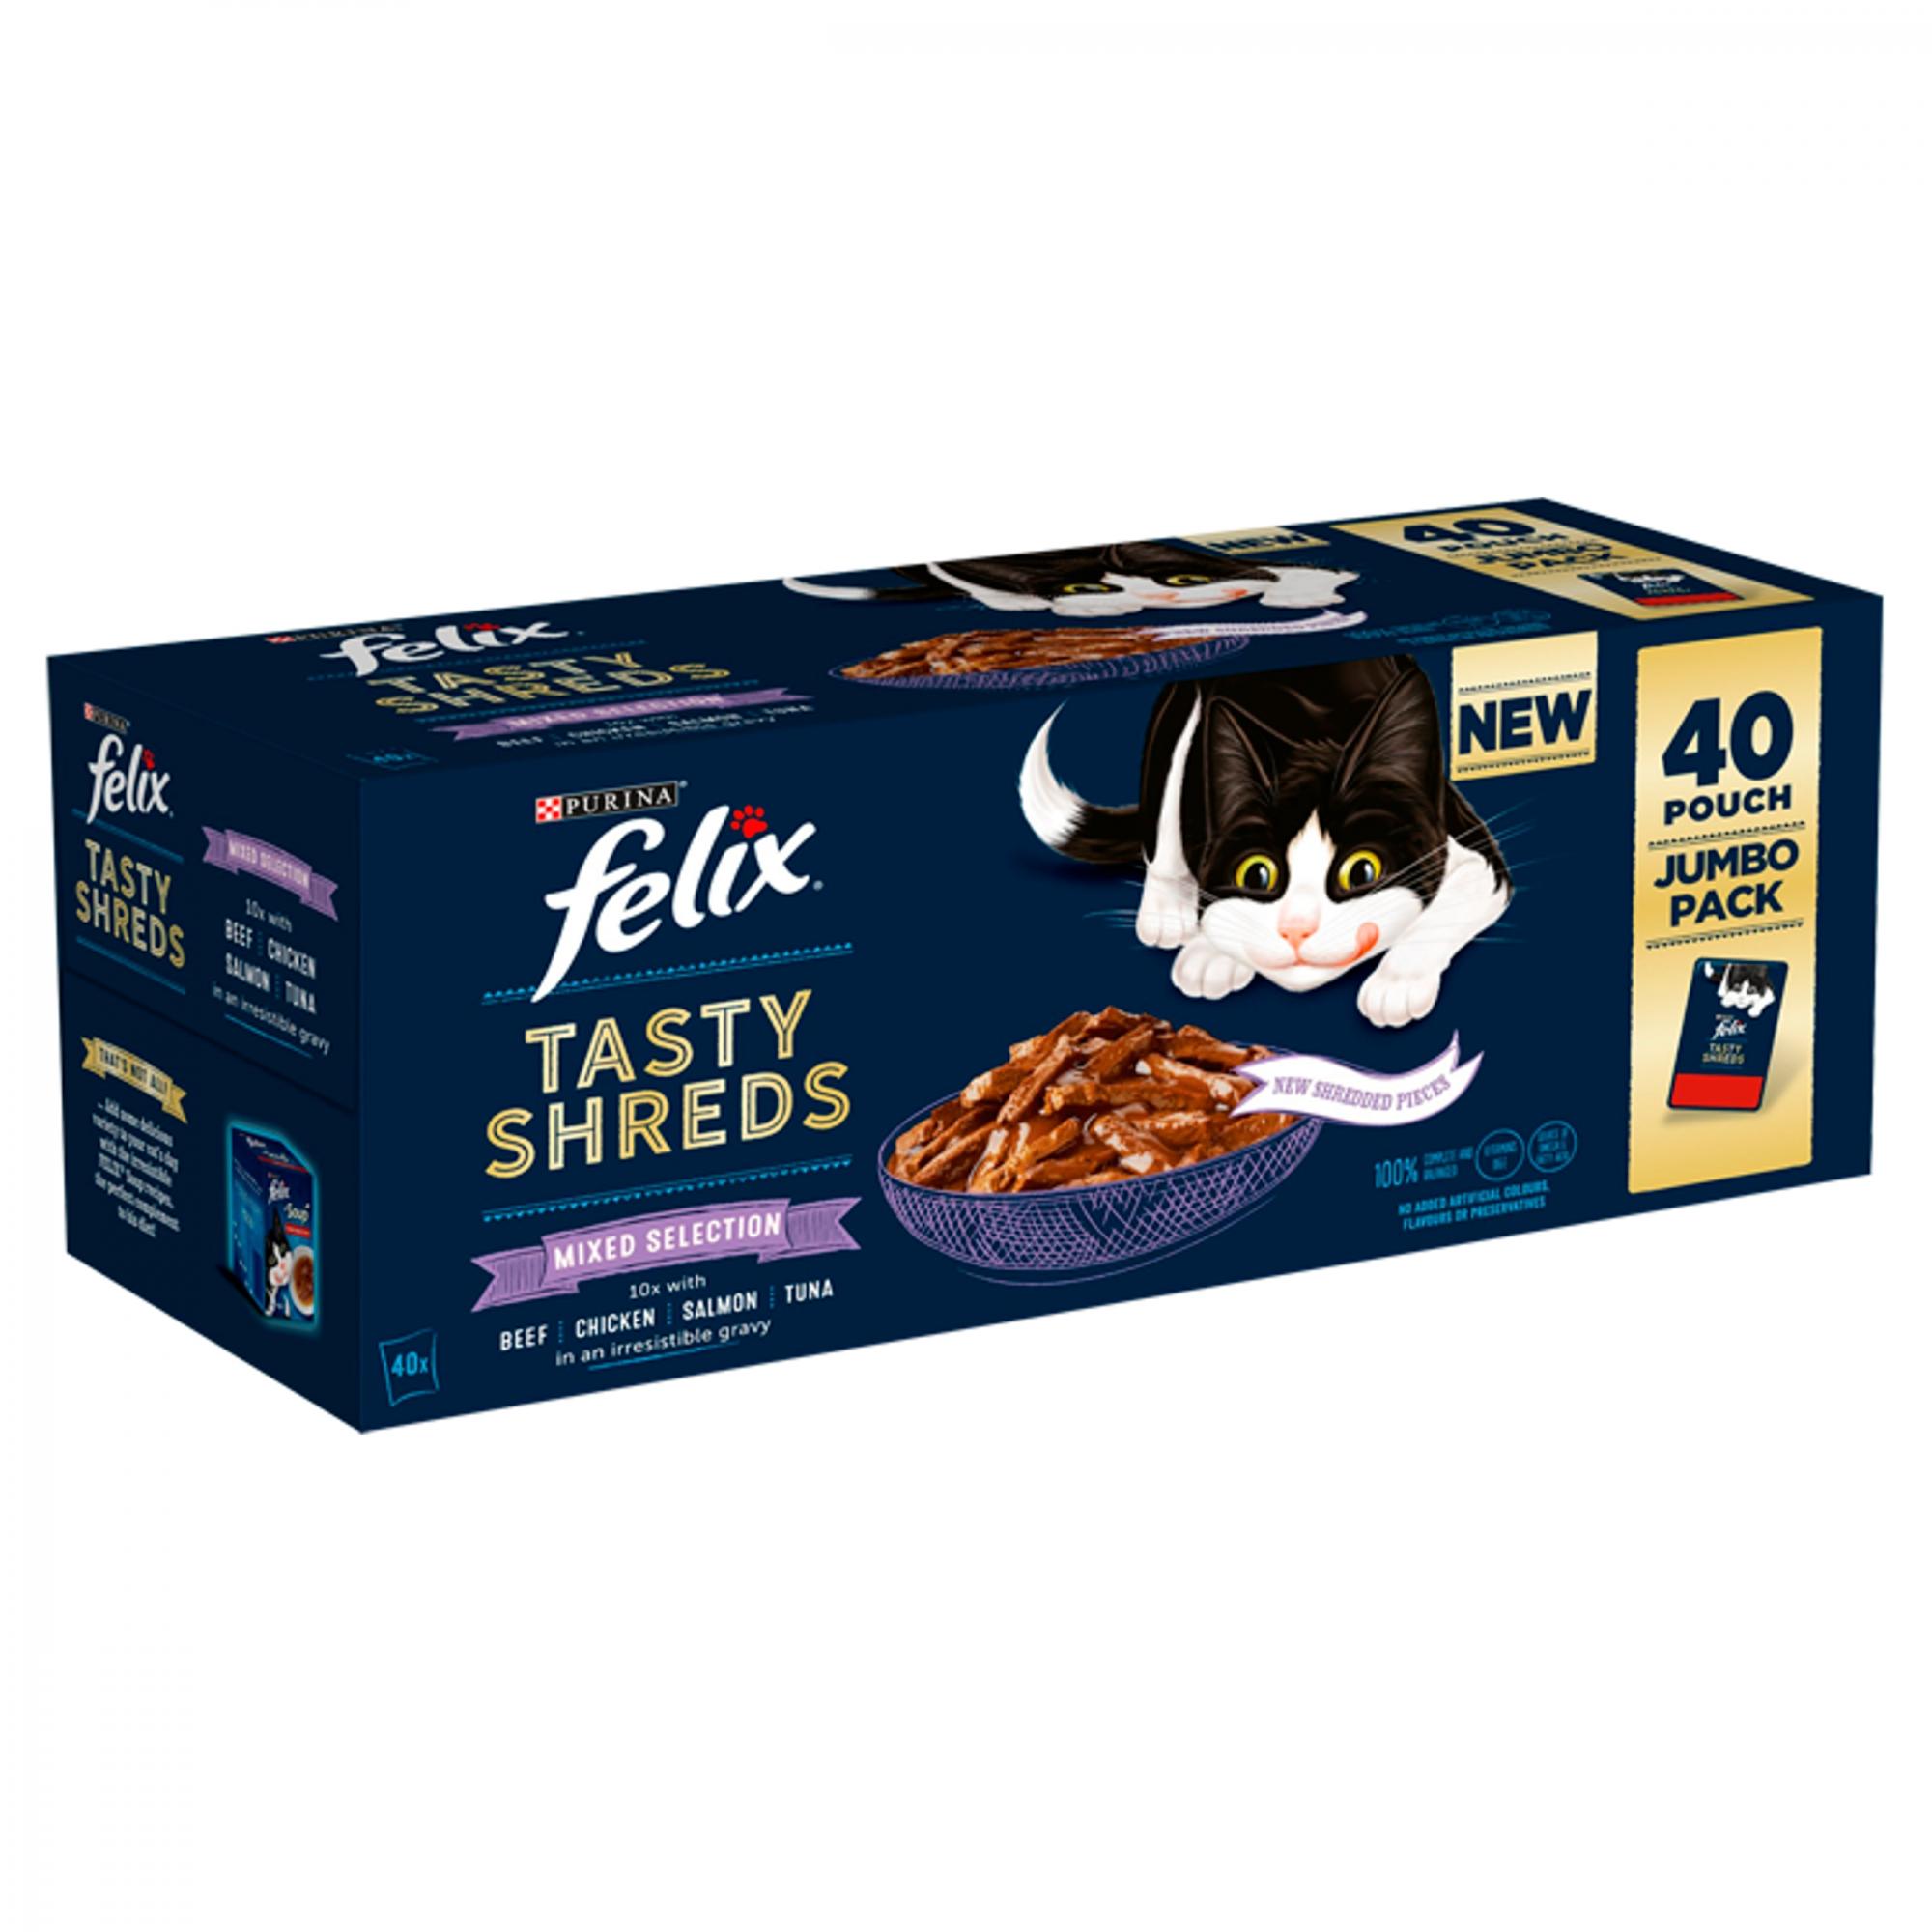 Felix Tasty Shreds Cat Food Jumbo Pack FREE delivery available